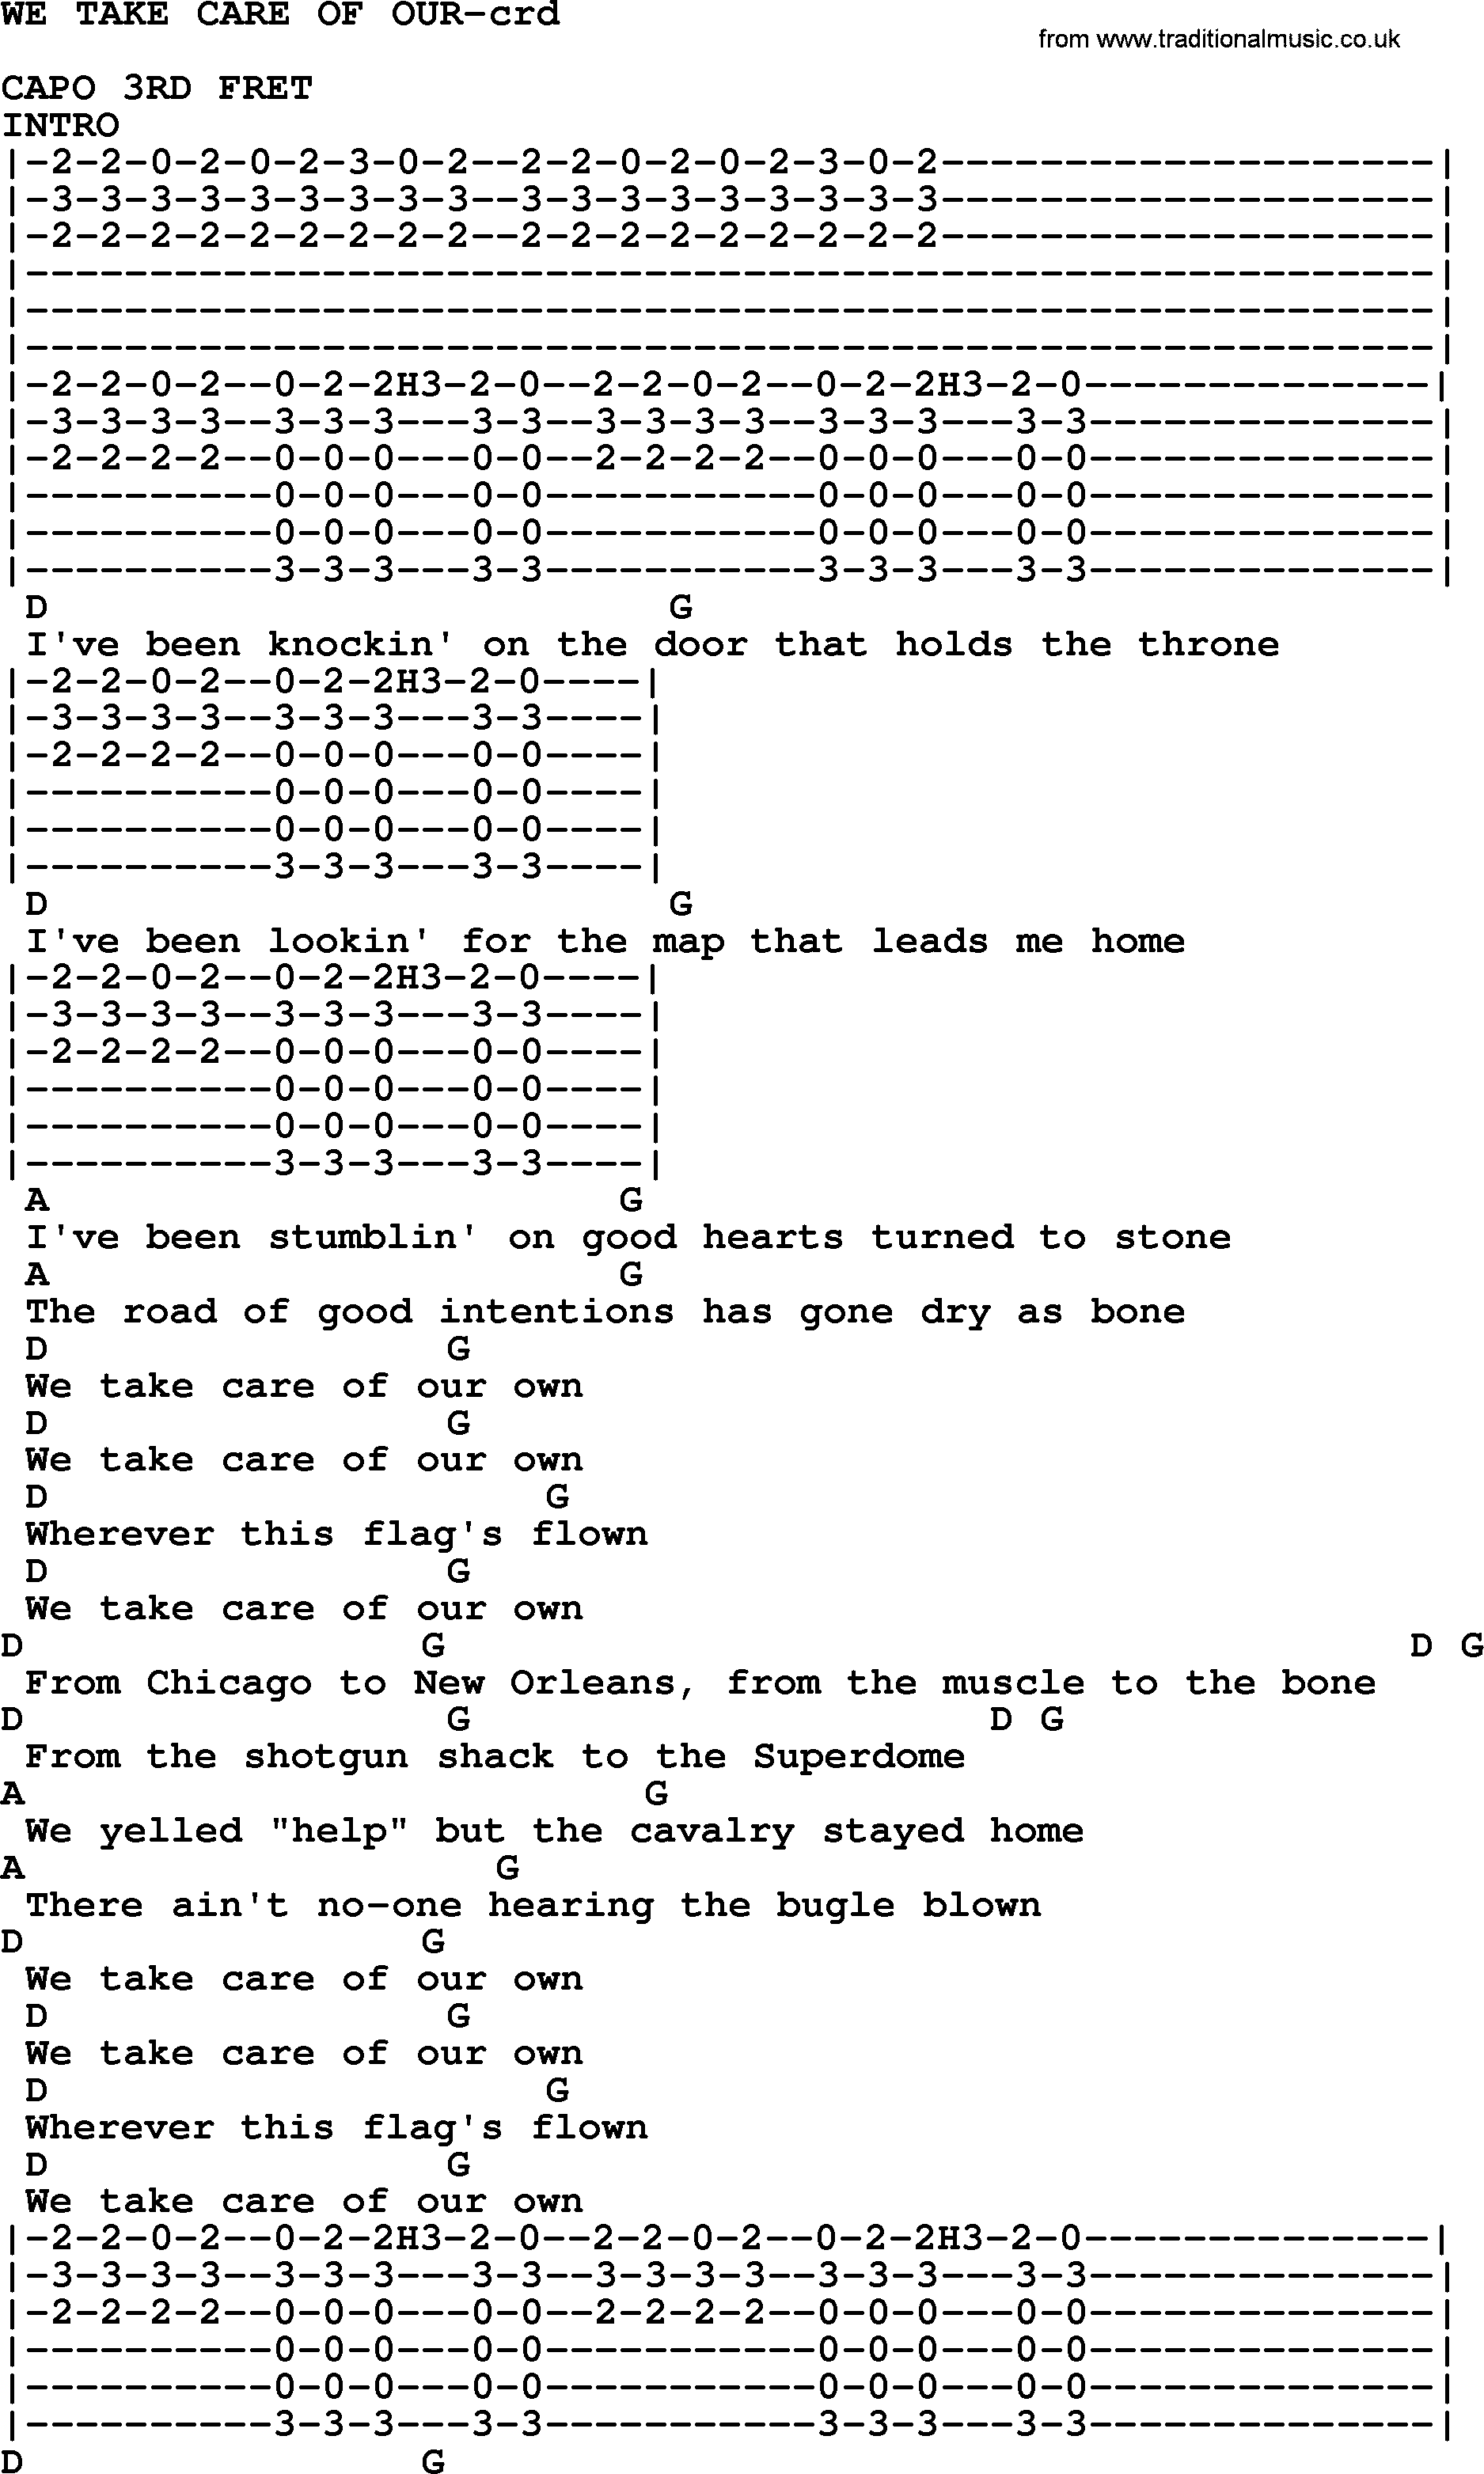 Bruce Springsteen song: We Take Care Of Our, lyrics and chords